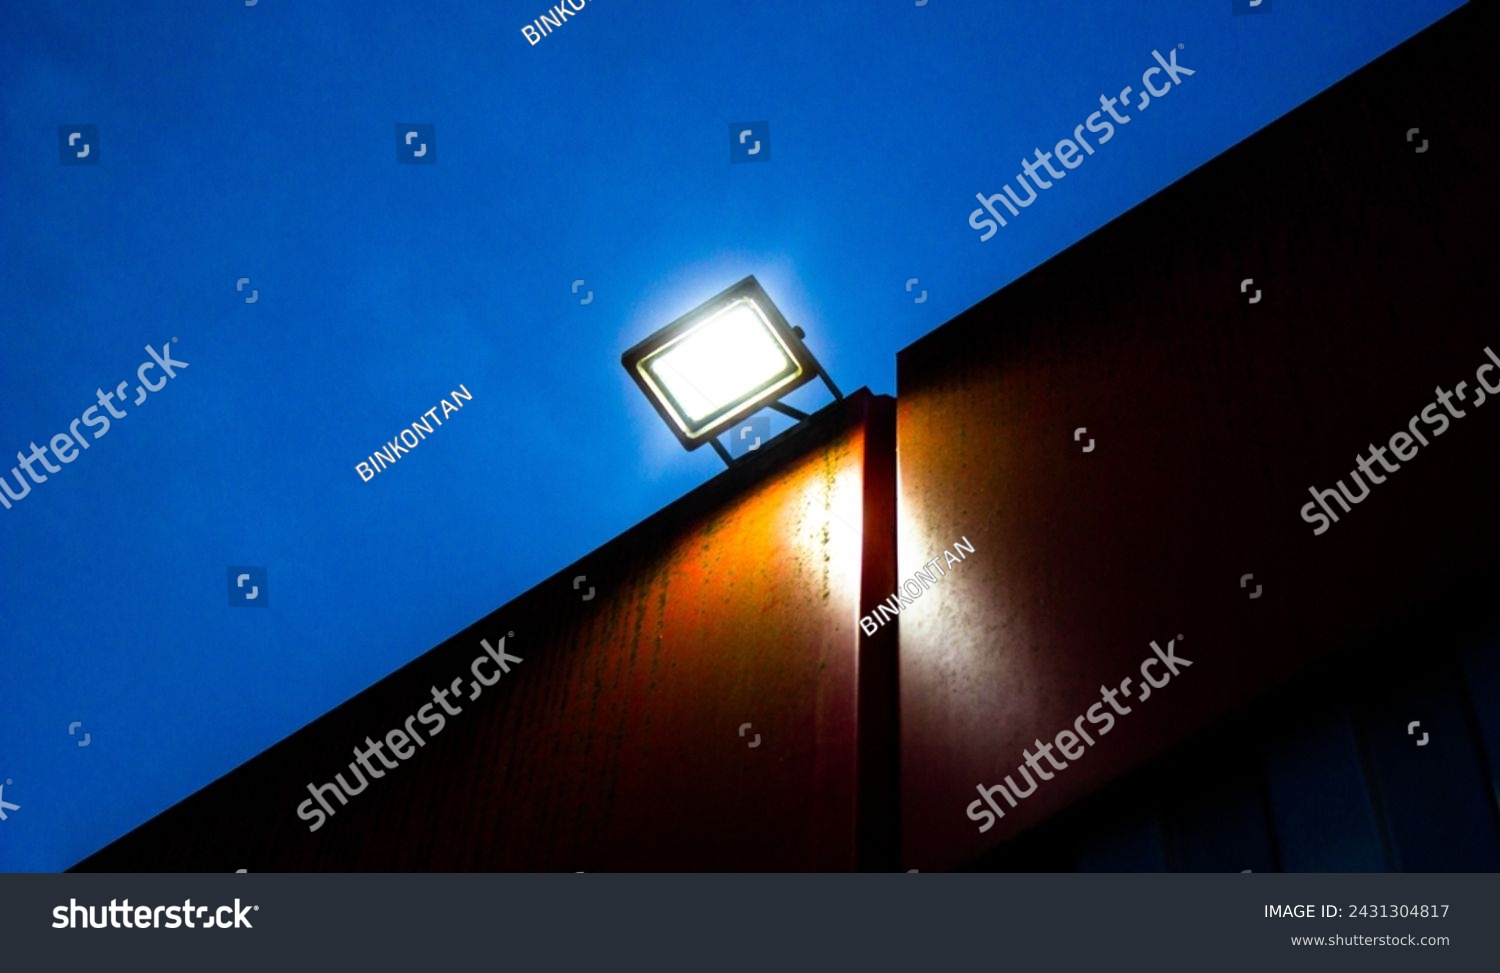 Spotlight, LED lamp, industrial glowing lantern on the wall of a building at night. #2431304817